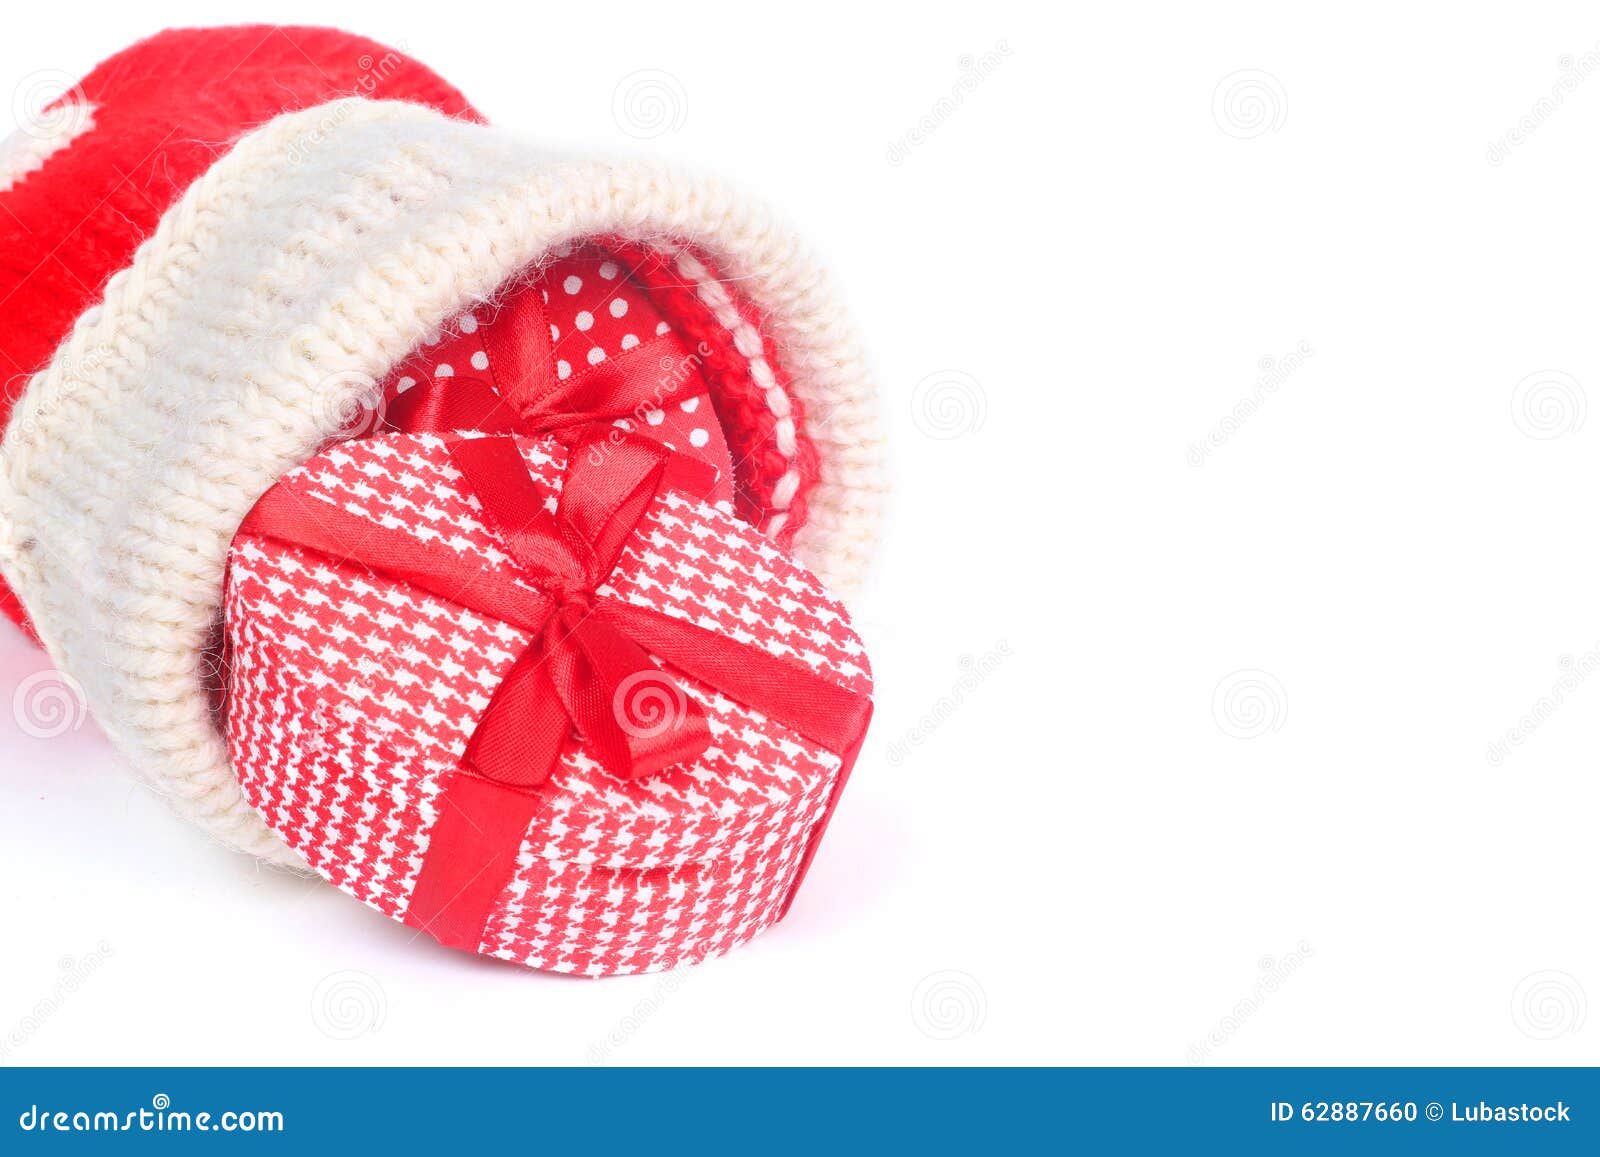 Christmas sock with gifts stock photo. Image of tradition - 62887660